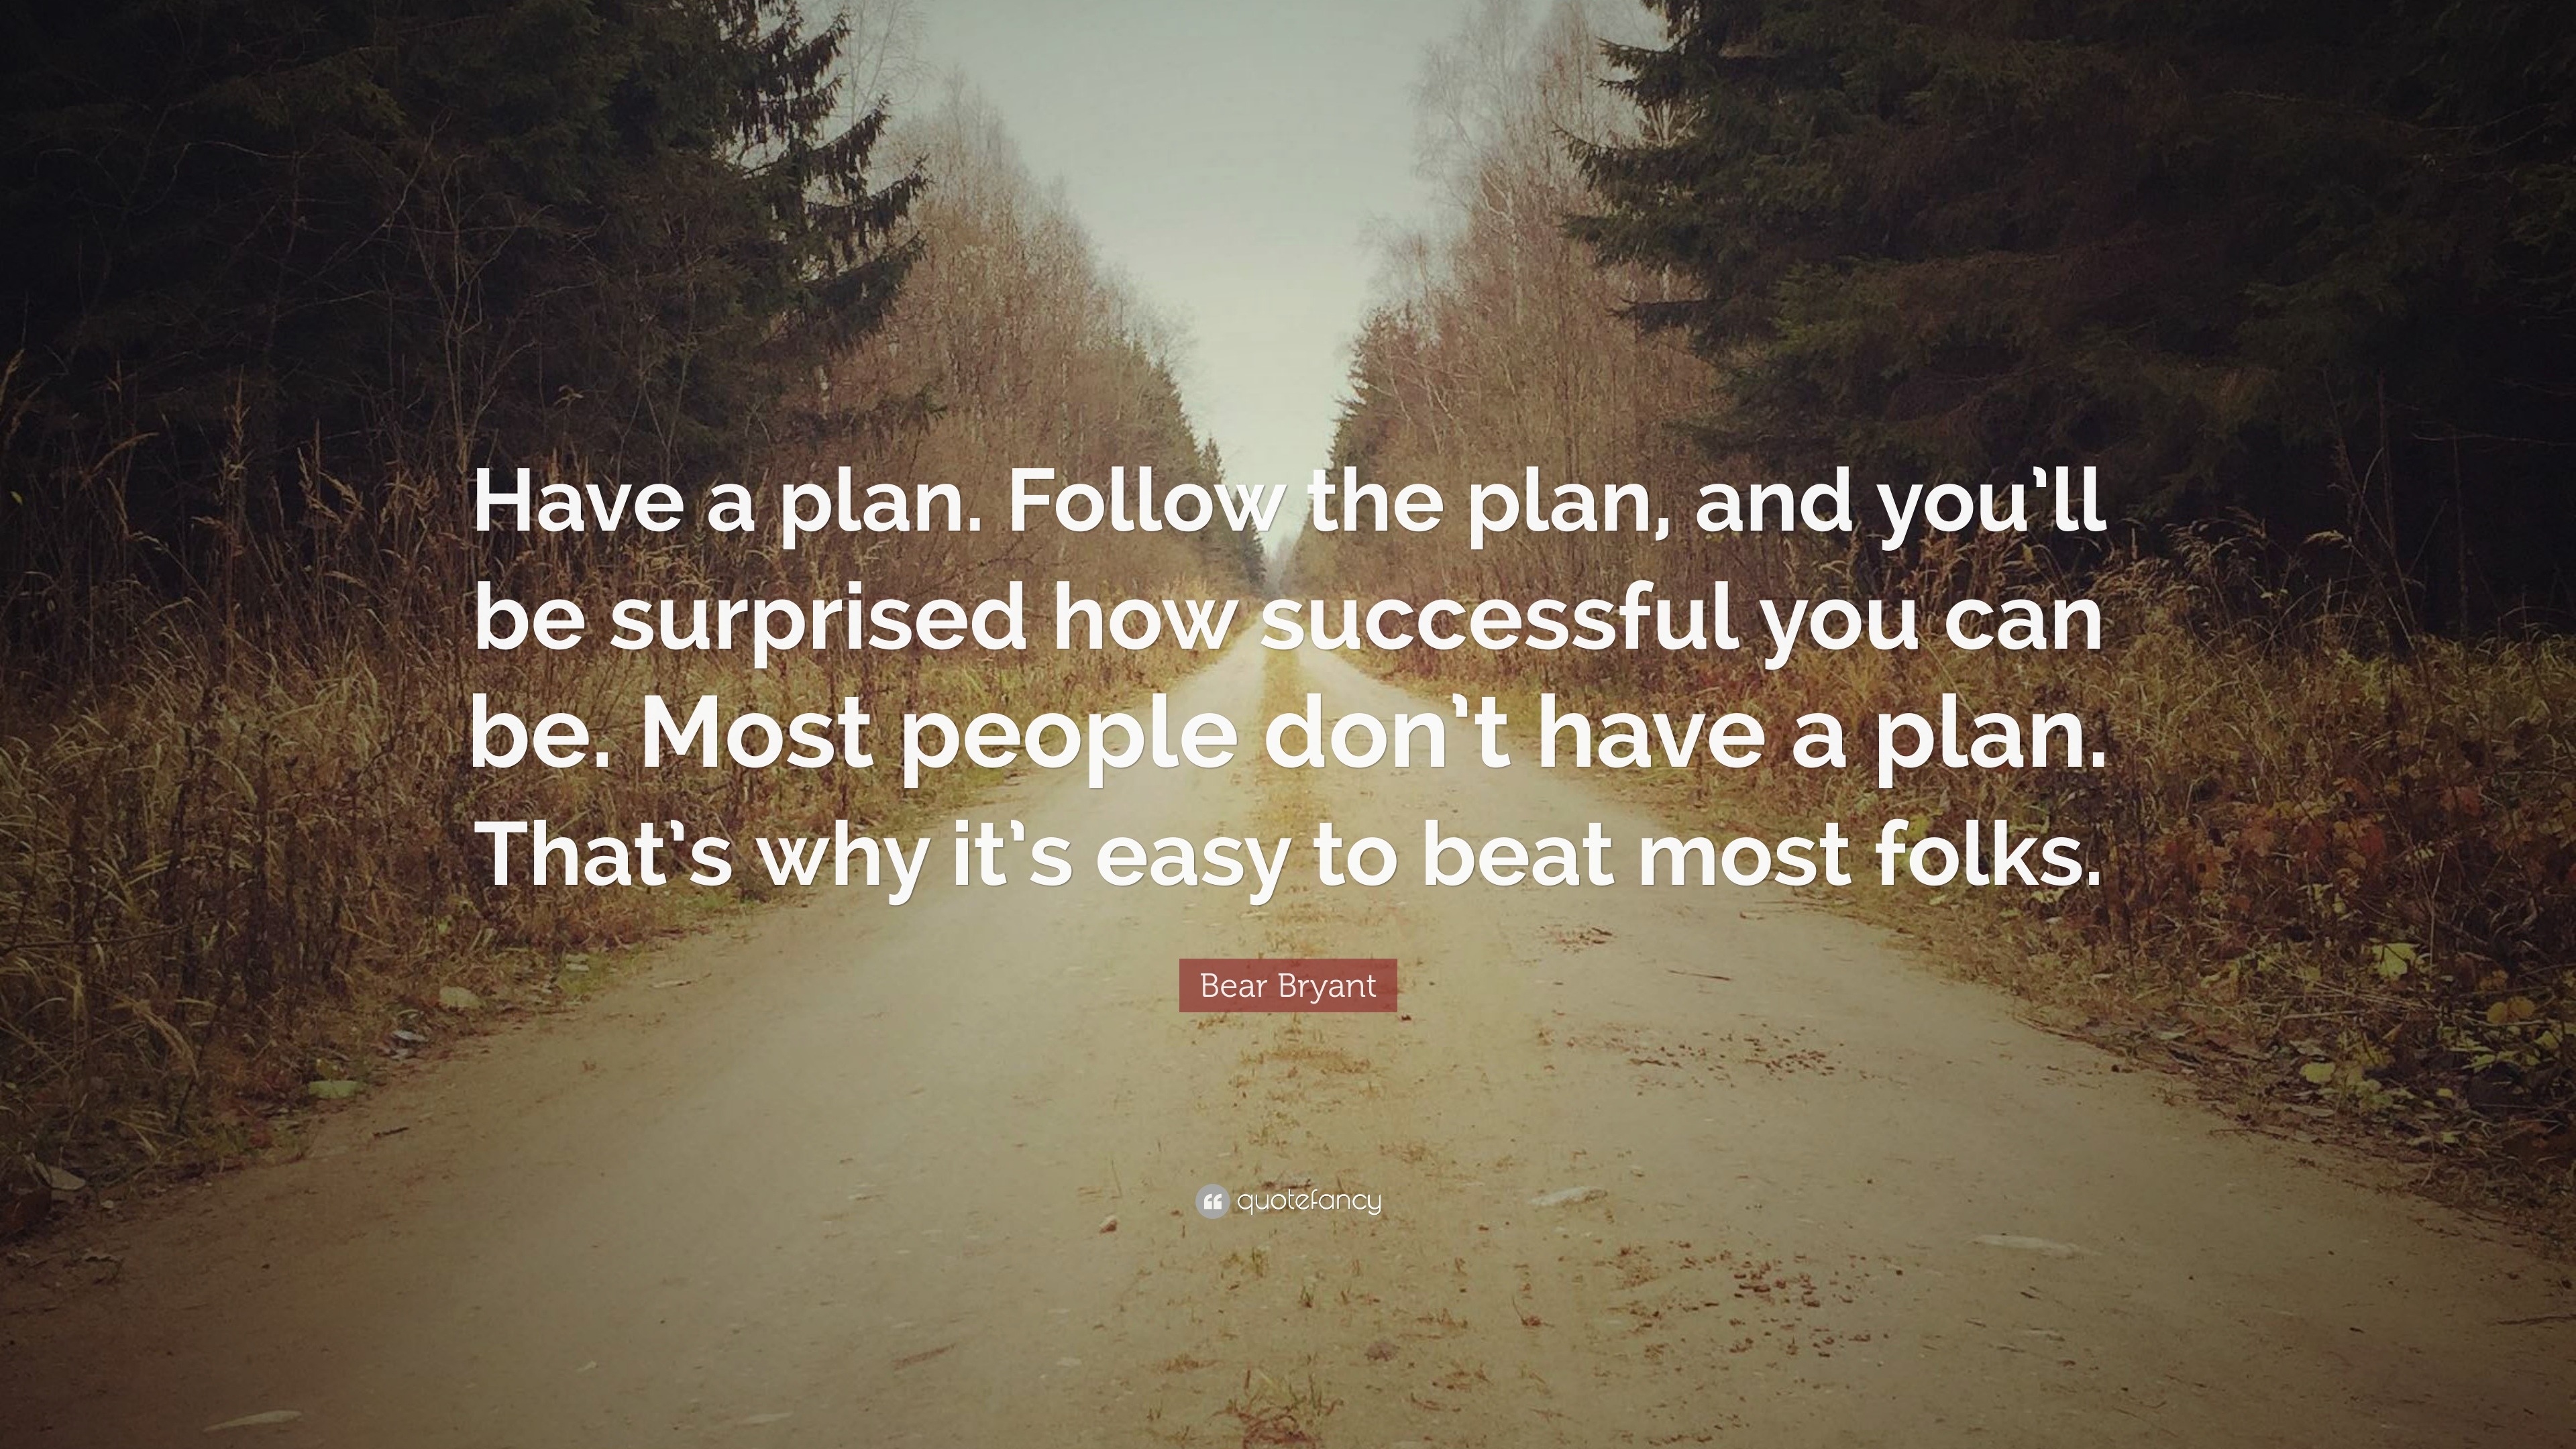 Bear Bryant Quote “Have a plan. Follow the plan, and you